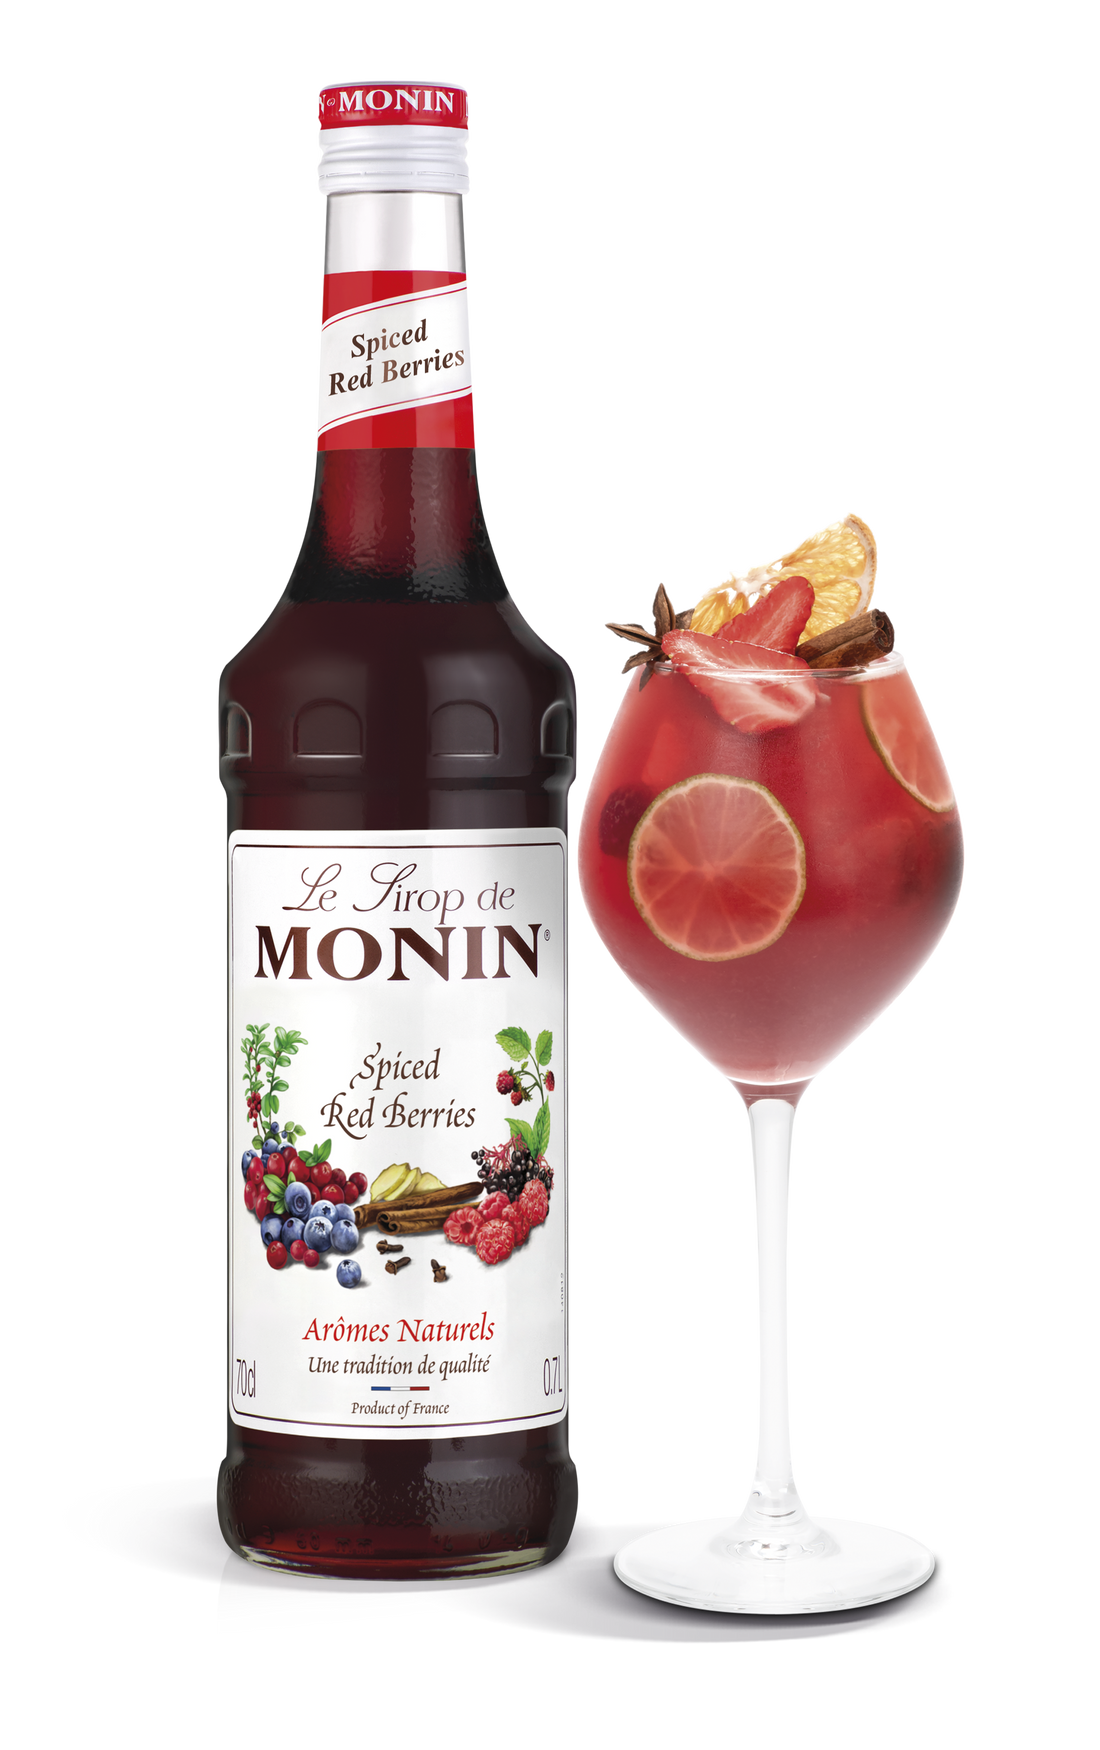 MONIN Spiced Red Berries Syrup